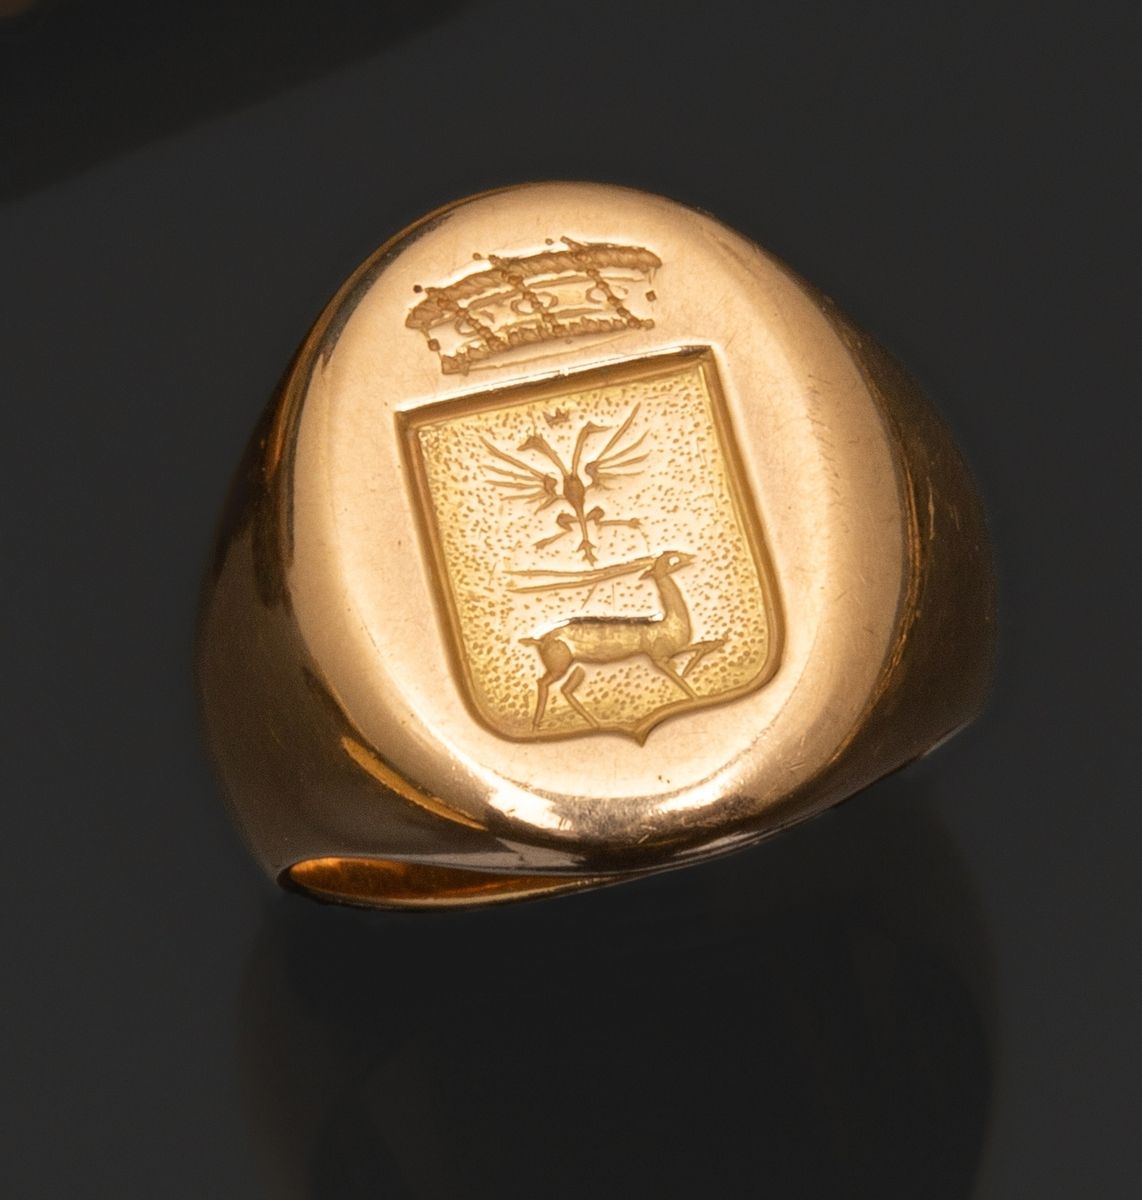 Null Chevalière in 18k yellow gold (750 thousandths) bearing the coat of arms of&hellip;